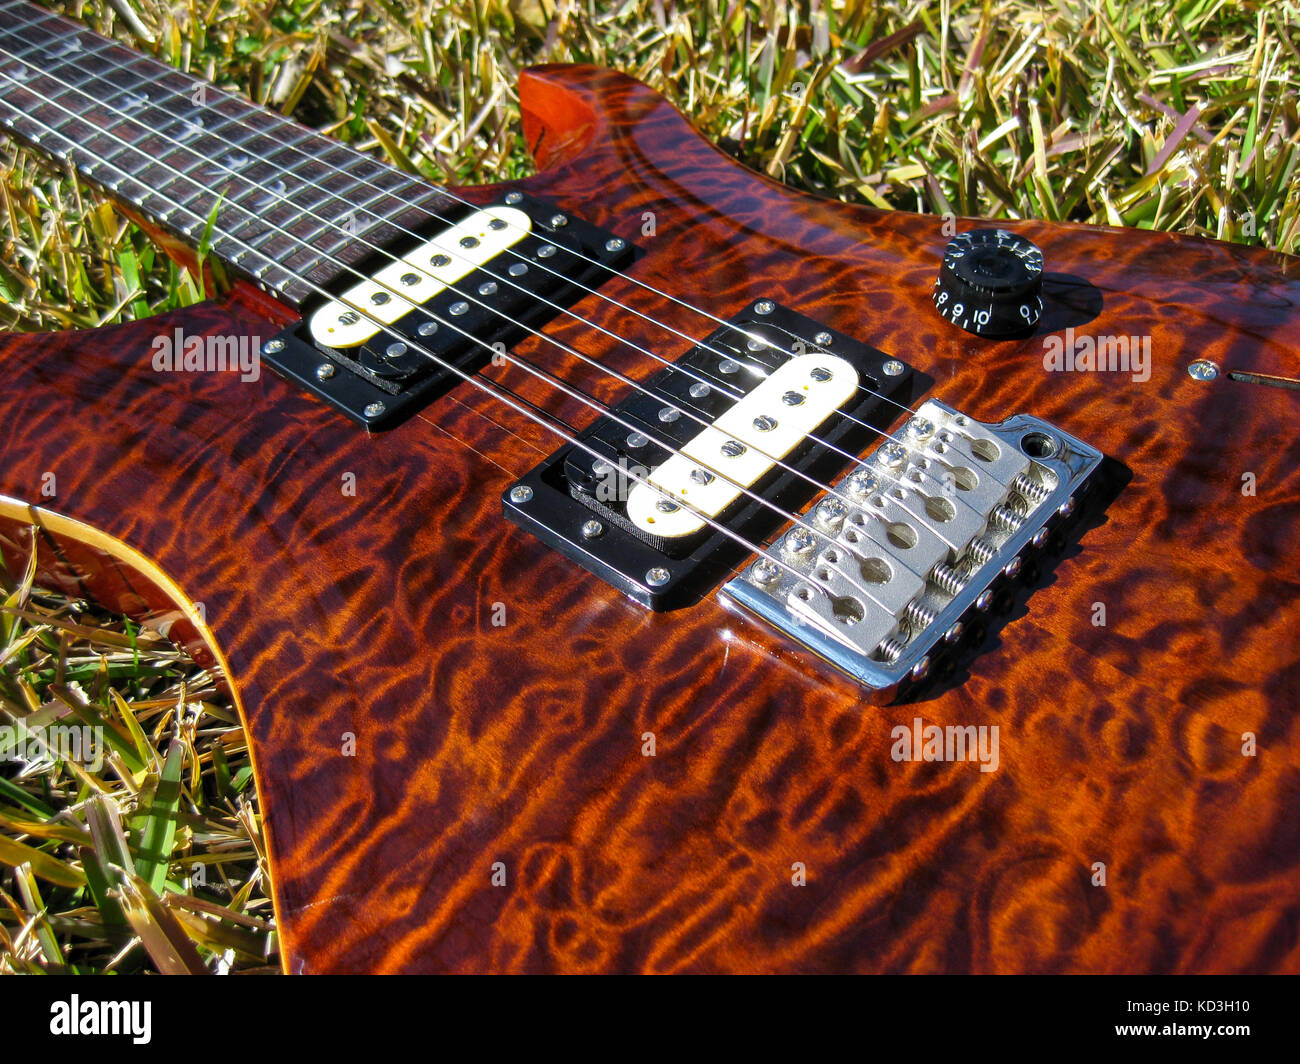 PRS Quilted maple brown guitar glowing in the afternoon sun. Stock Photo